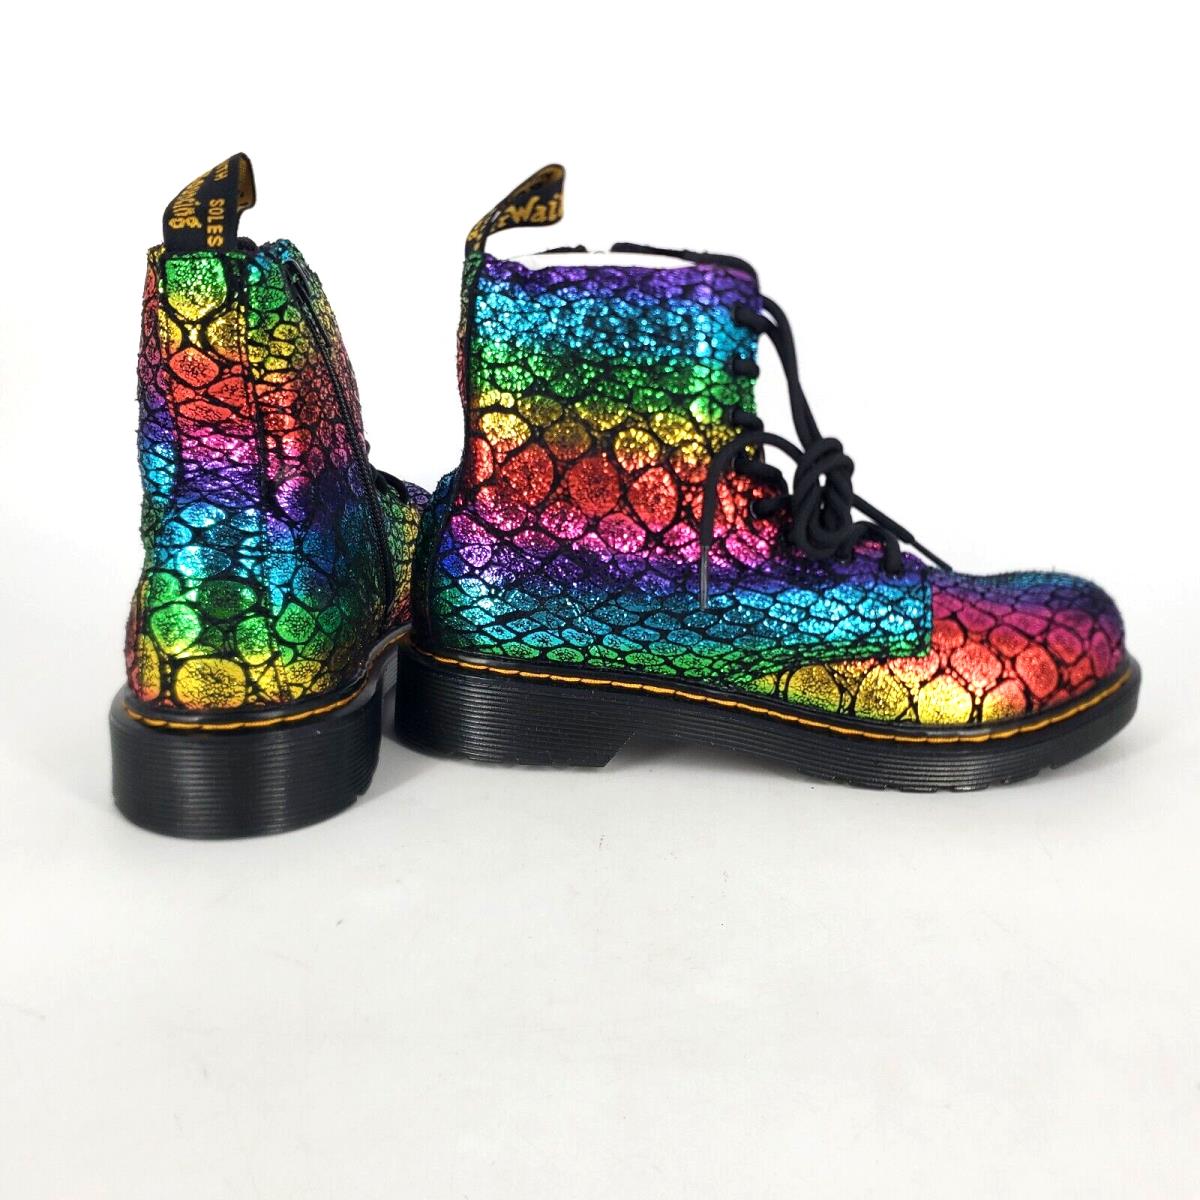 Doc Martens 1460 Pascal Boots Youth Size 5 Shoes Rainbow Croc Metallic Suede